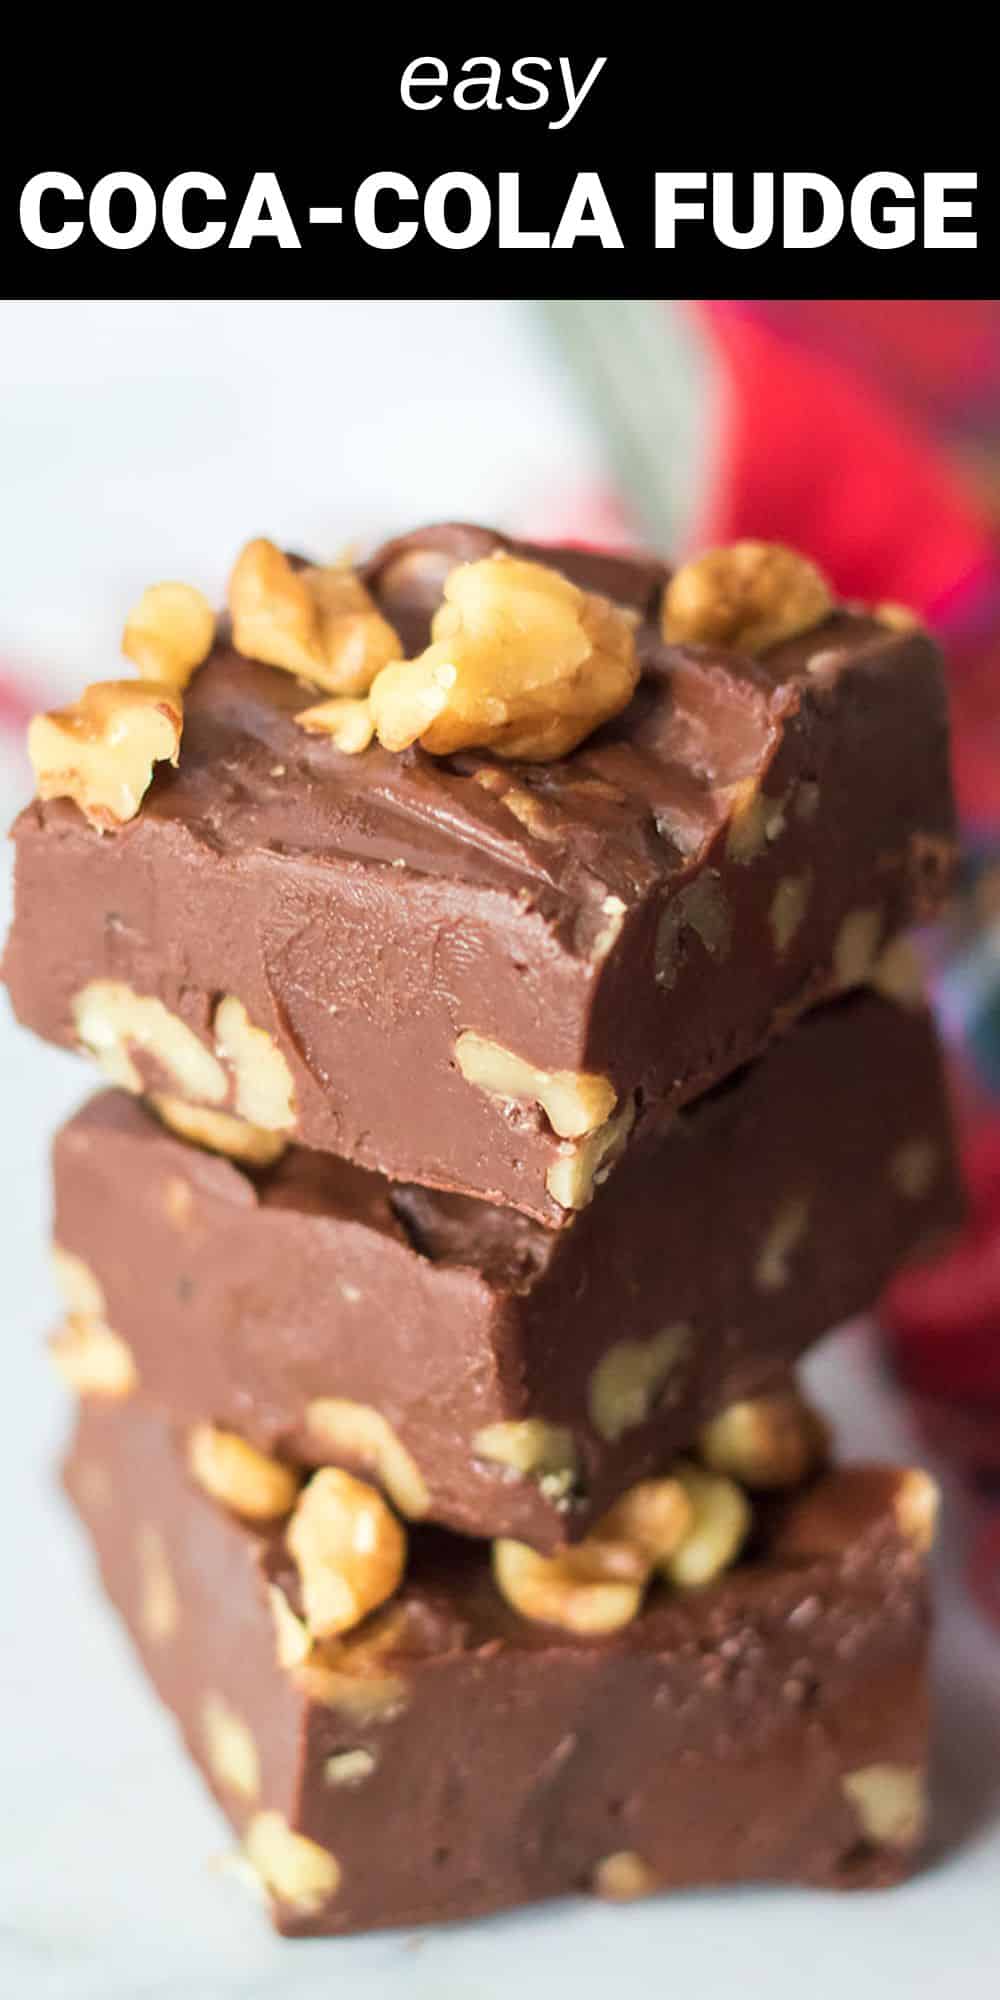 This Coca Cola Fudge has all the wonderful and decadent classic fudge flavors but with a surprising ingredient! A rich Coca-Cola reduction is added to make creamy, melt-in-your mouth squares of fudgy goodness!